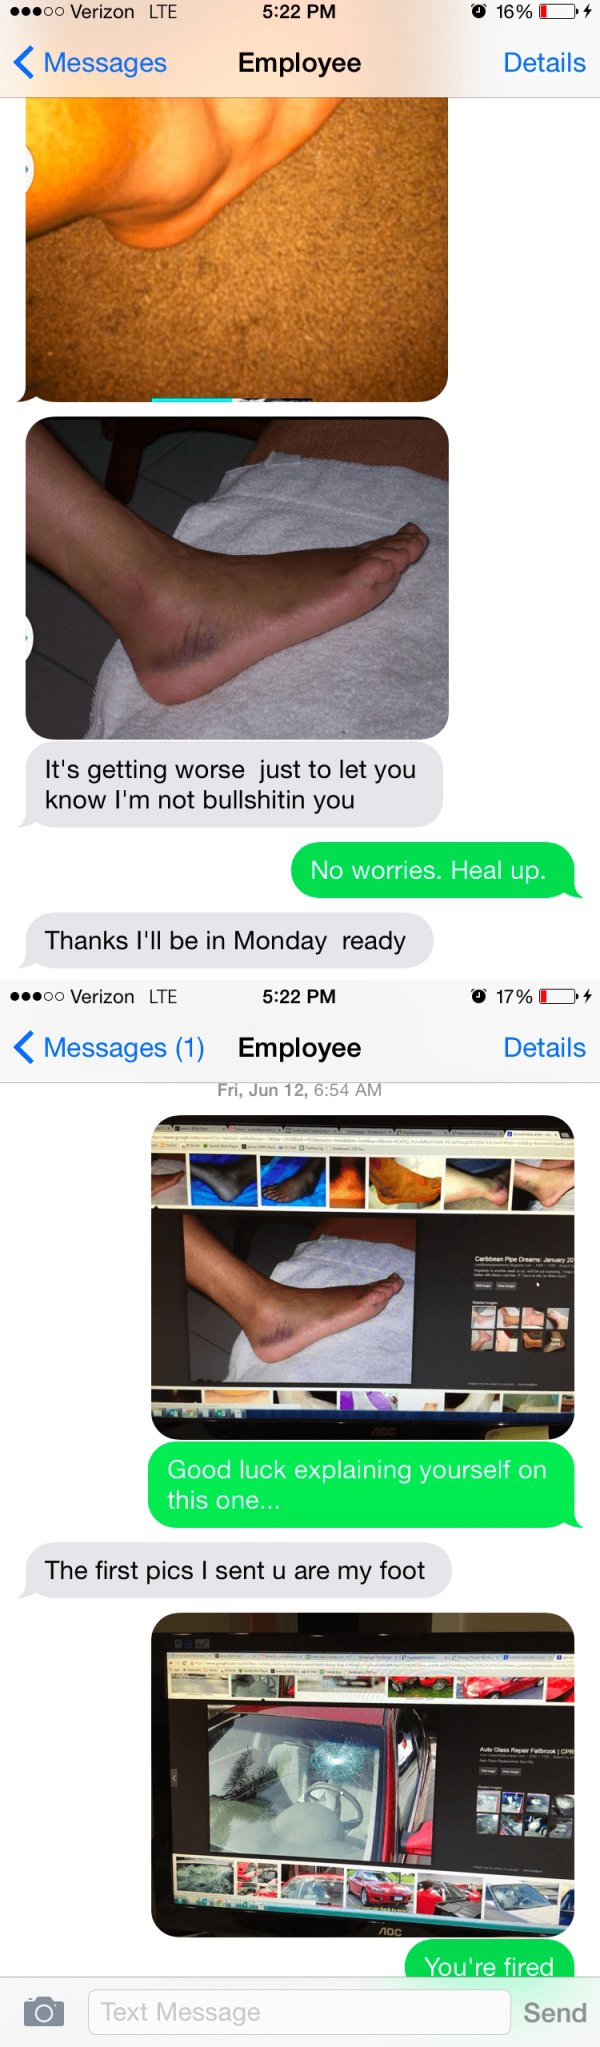 Sick Employees Who Got Busted On The Internet (10 pics)